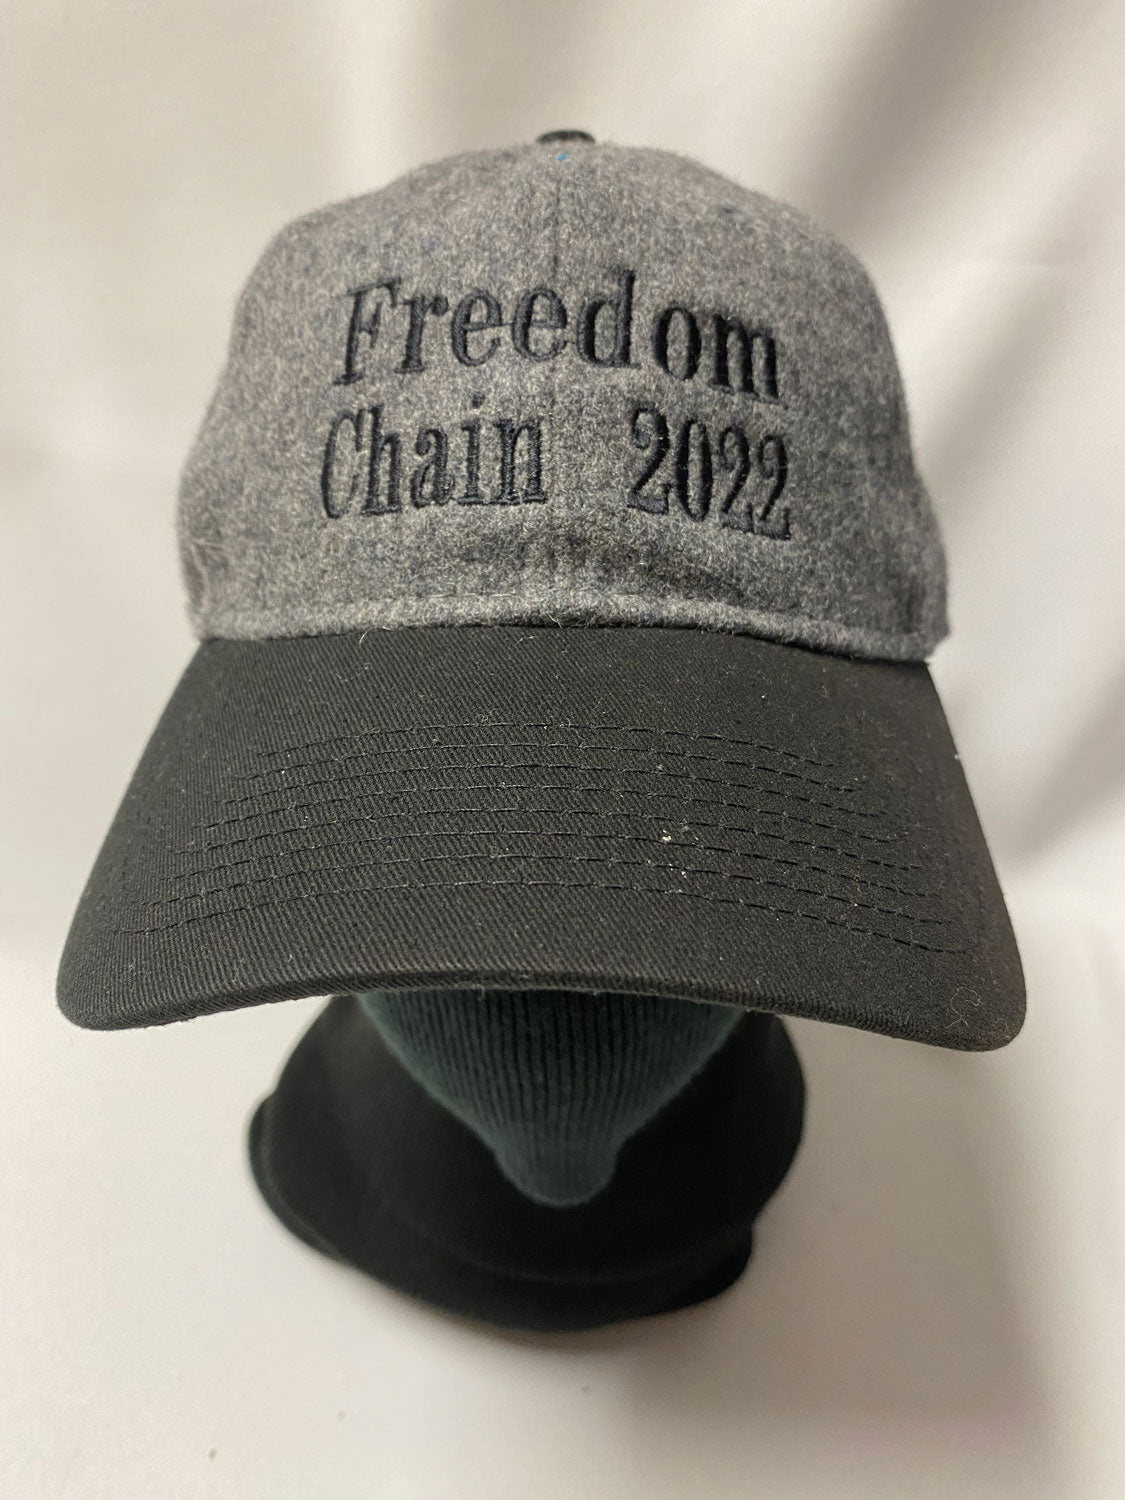 BALL CAP FREEDOM CHAIN 2022 - black embroidery on grey/black